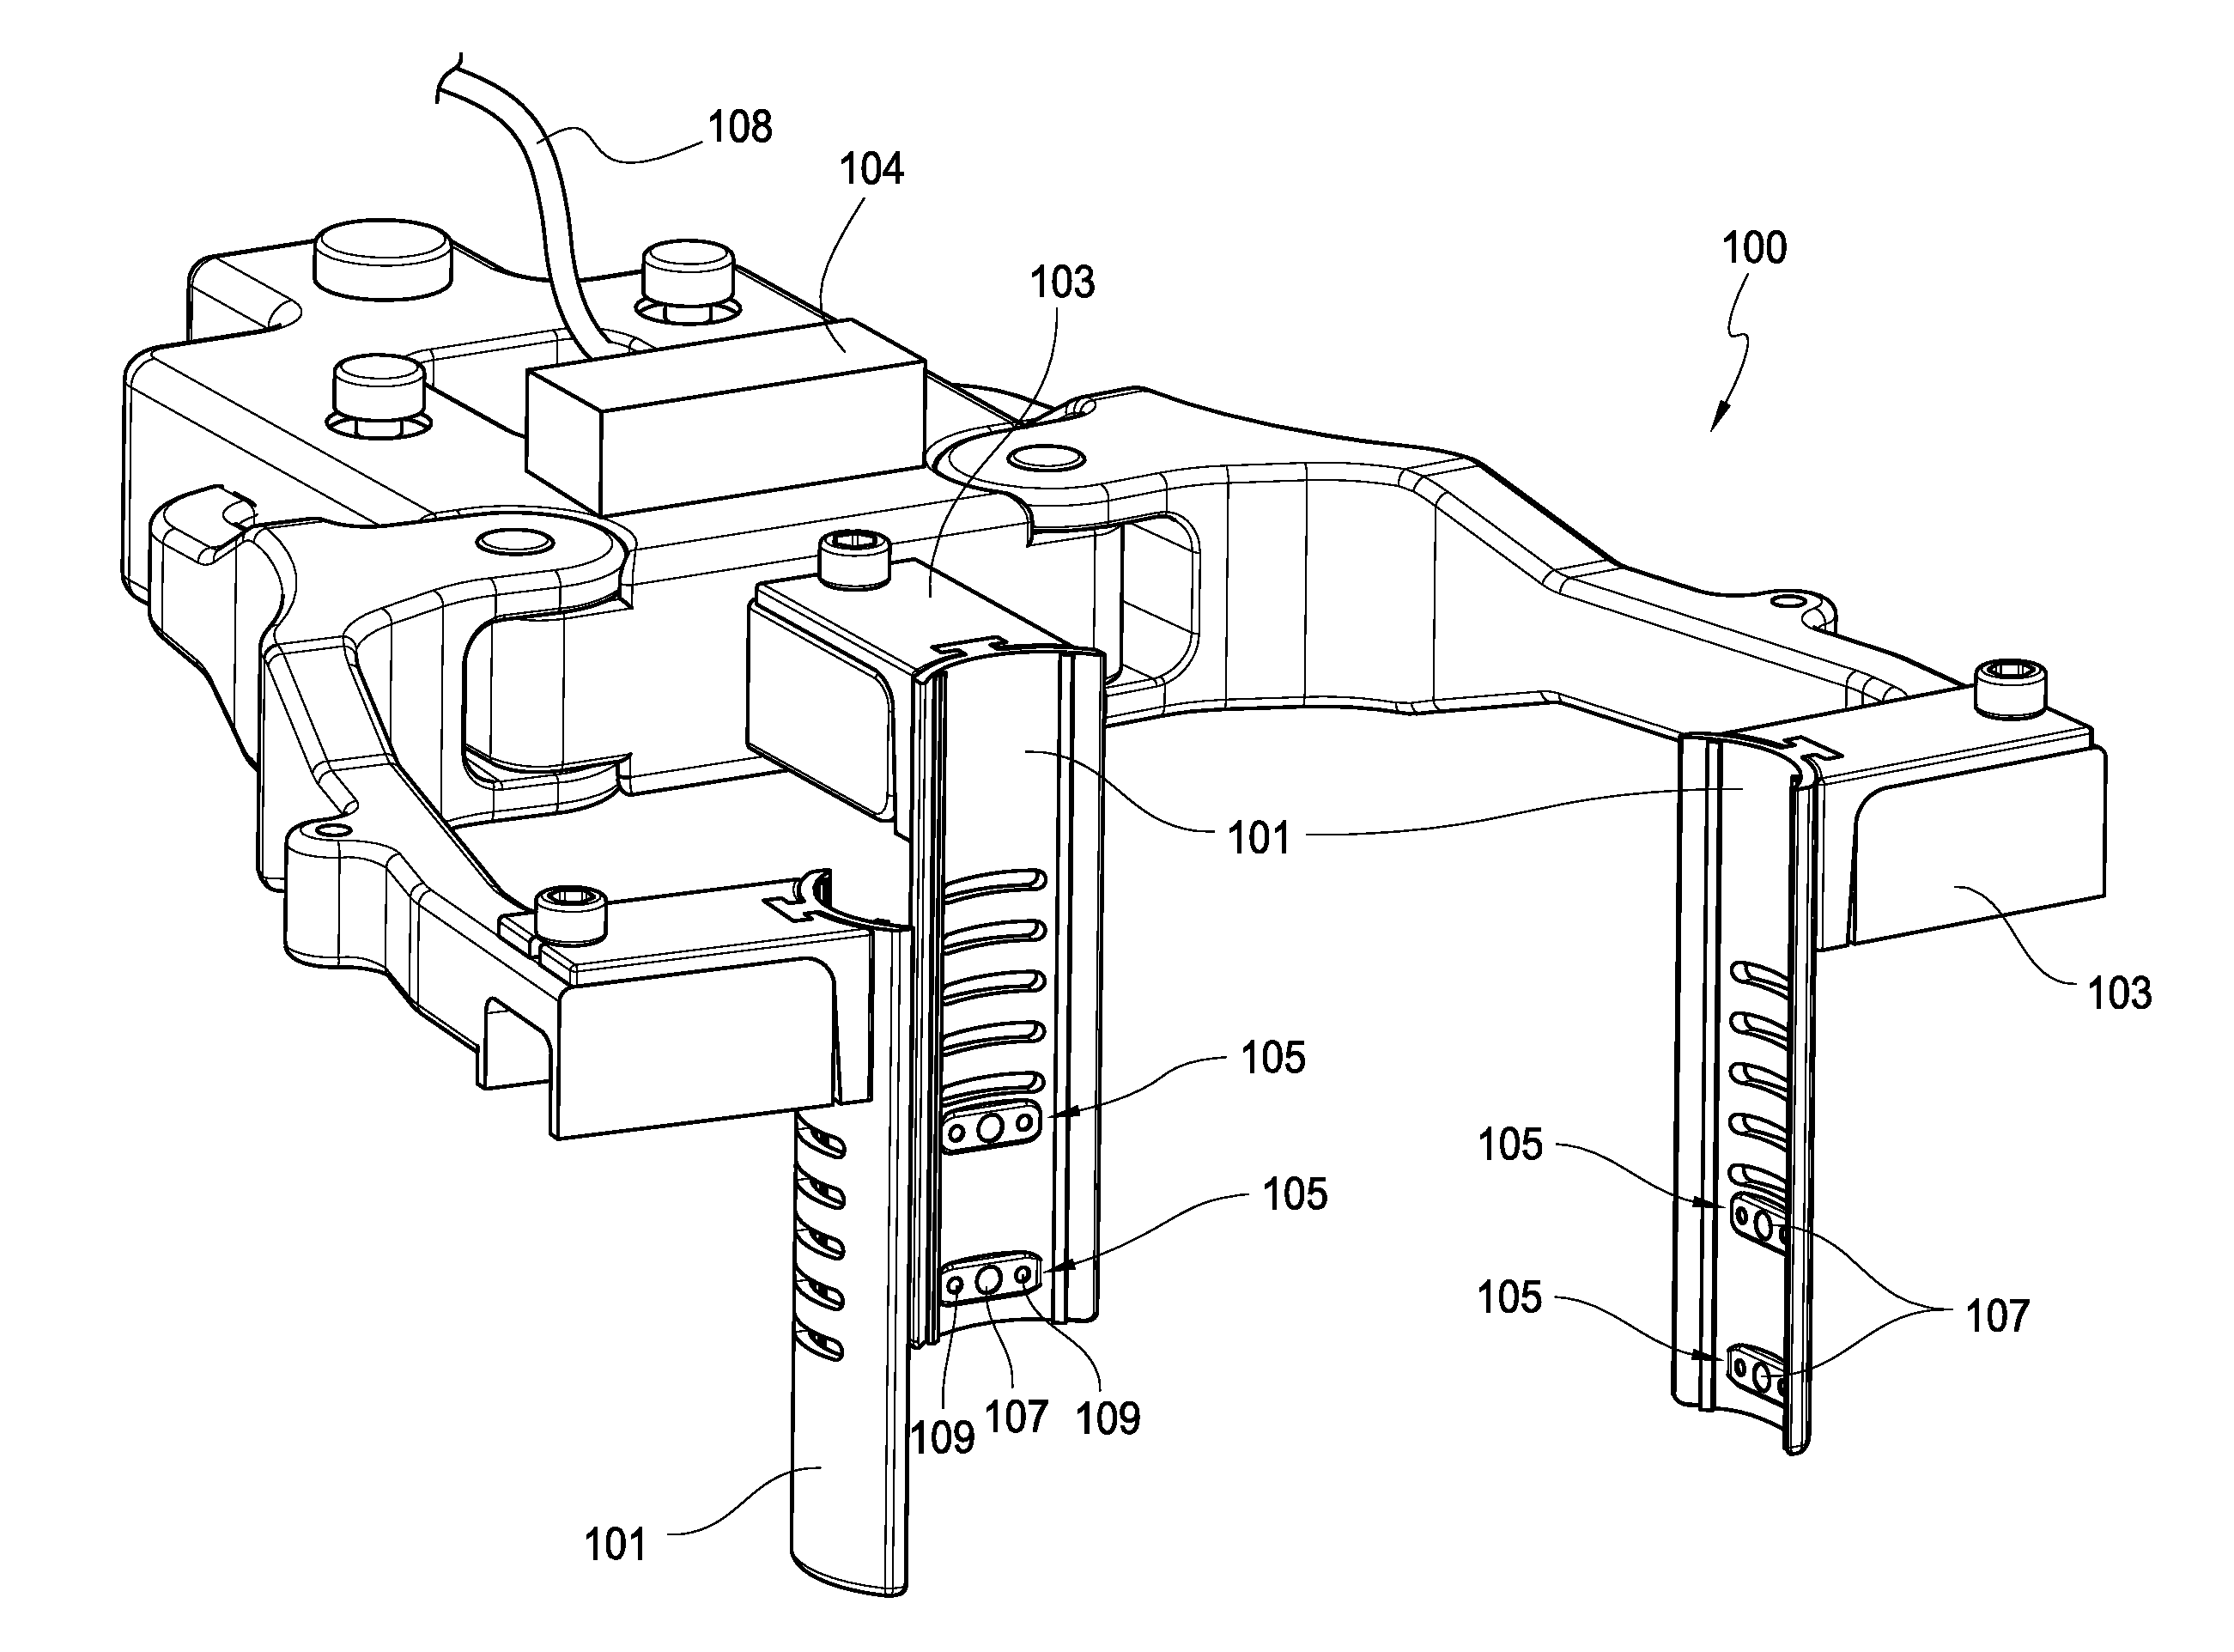 Binocular viewing assembly for a surgical visualization system